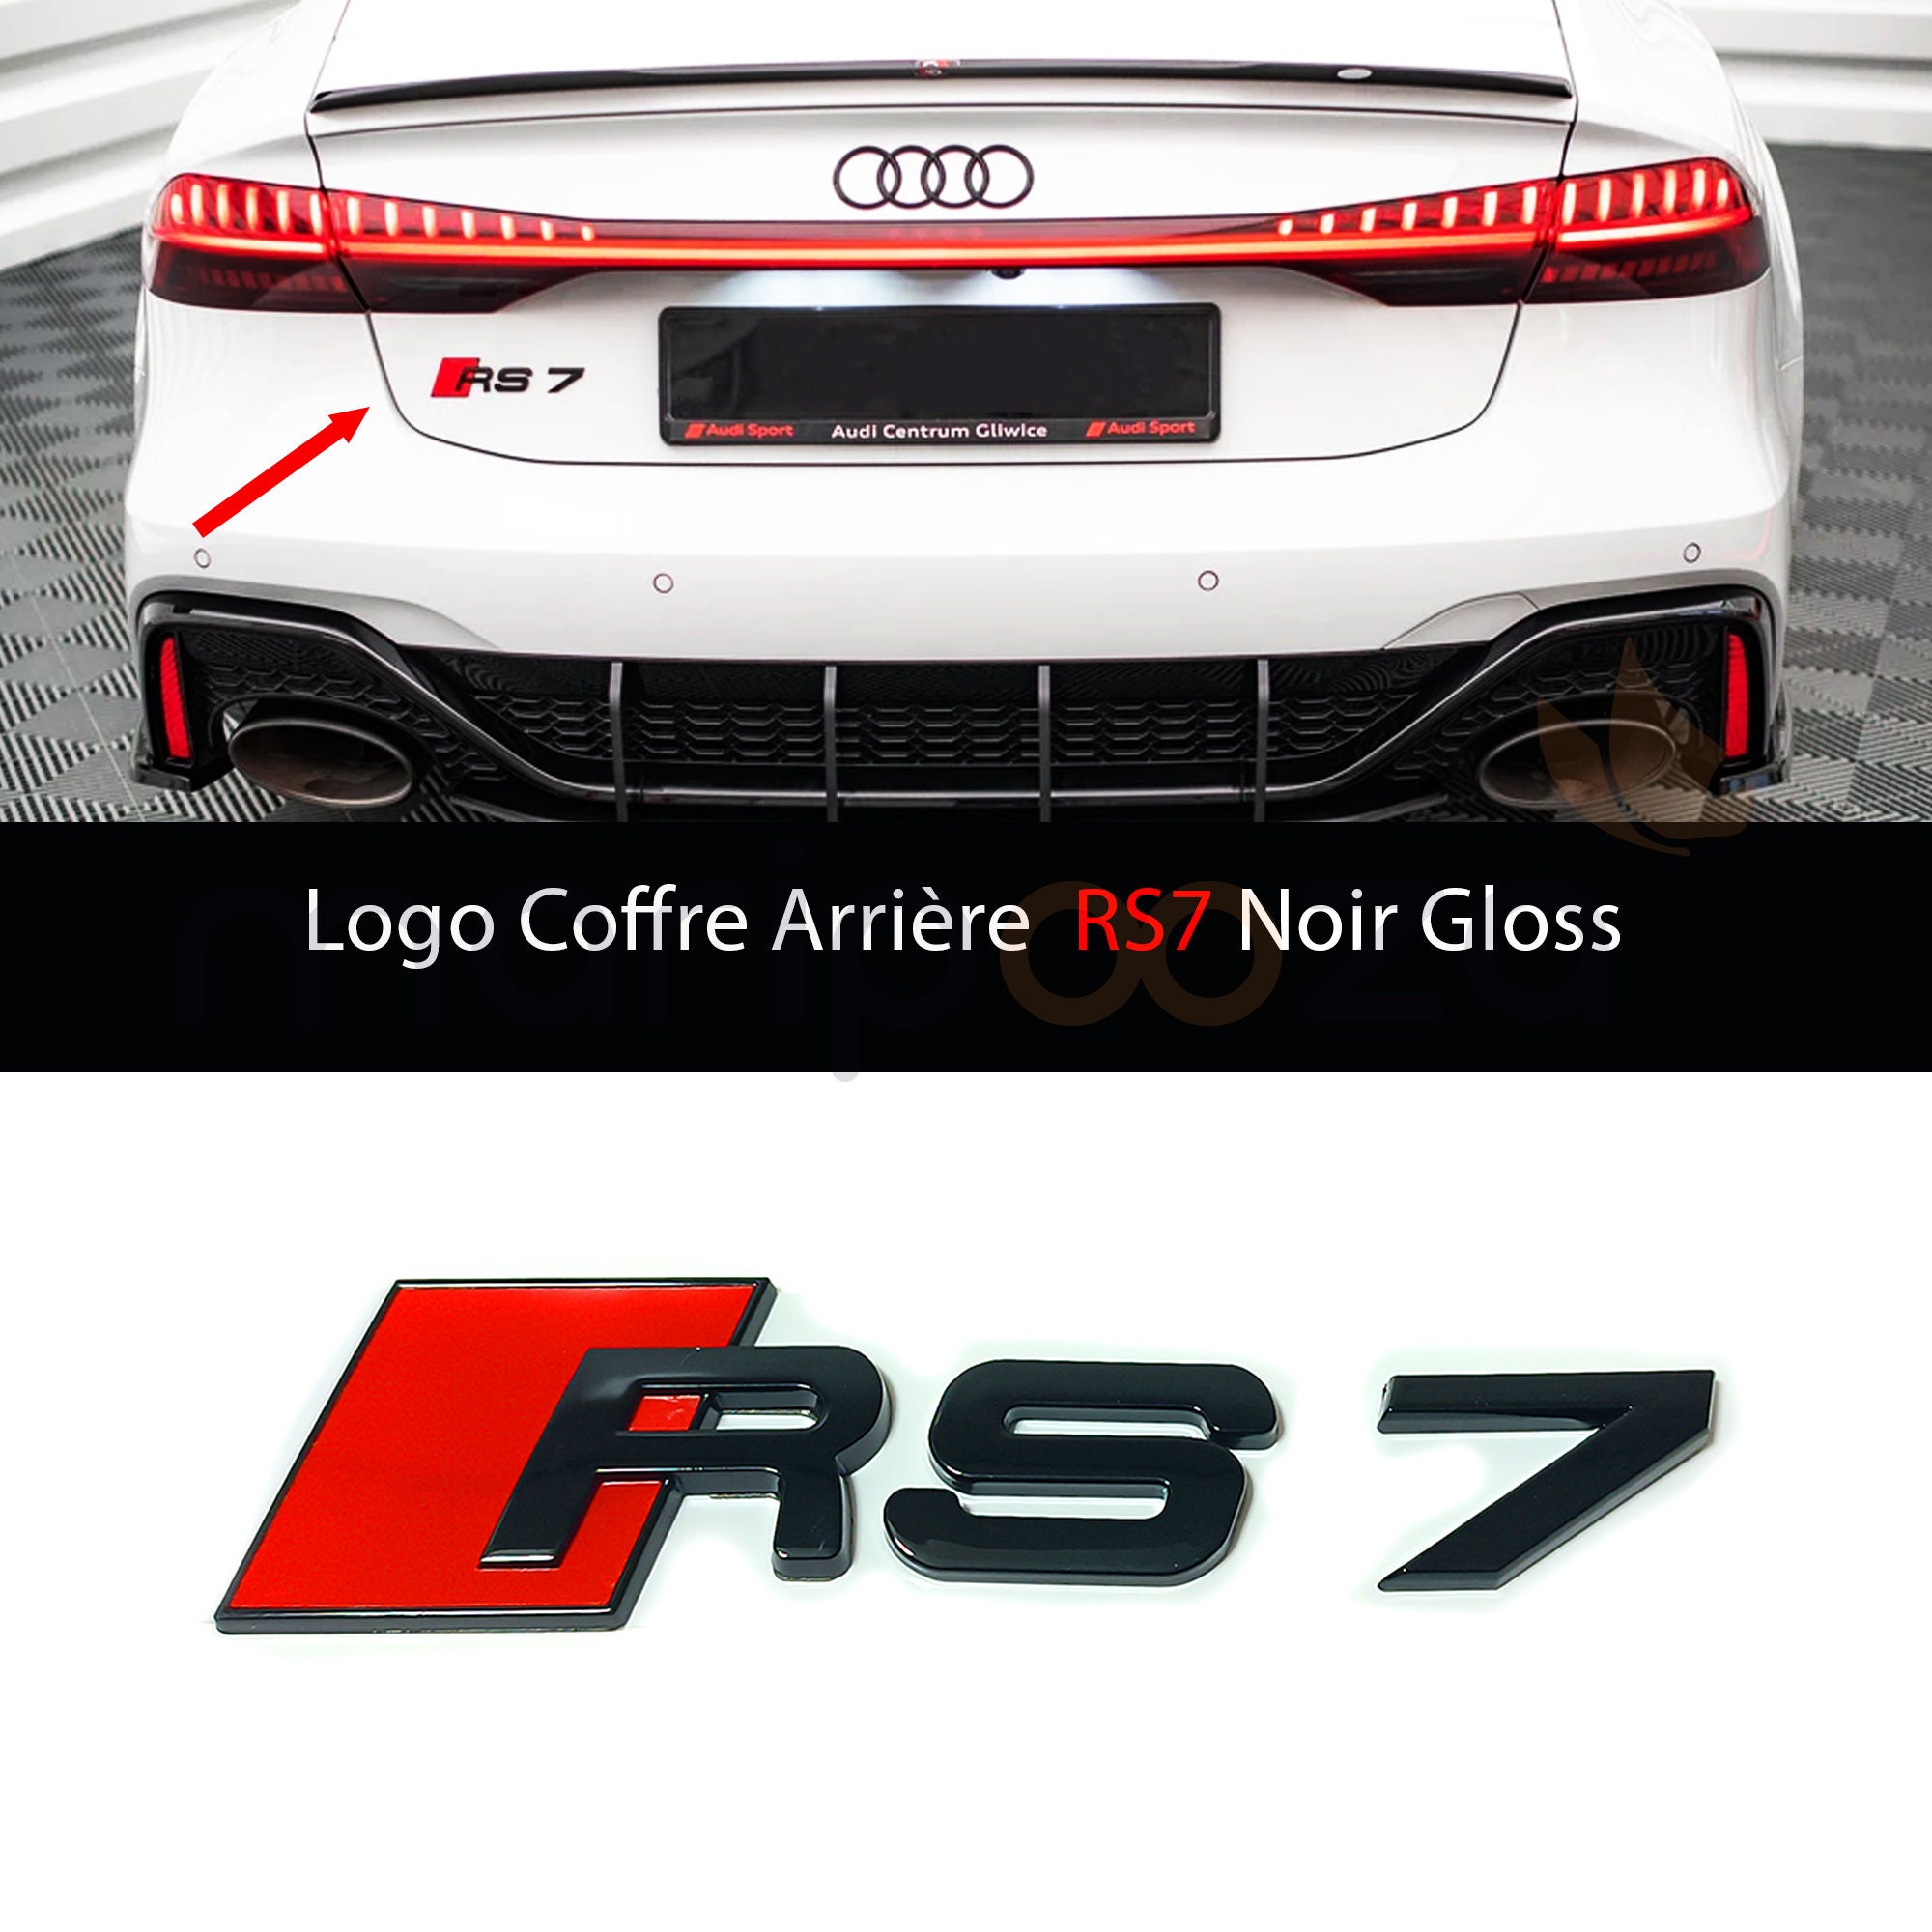 RS7 Glossy Black Rear Trunk Emblem Logo for Audi A7 S7 RS7 - Etsy